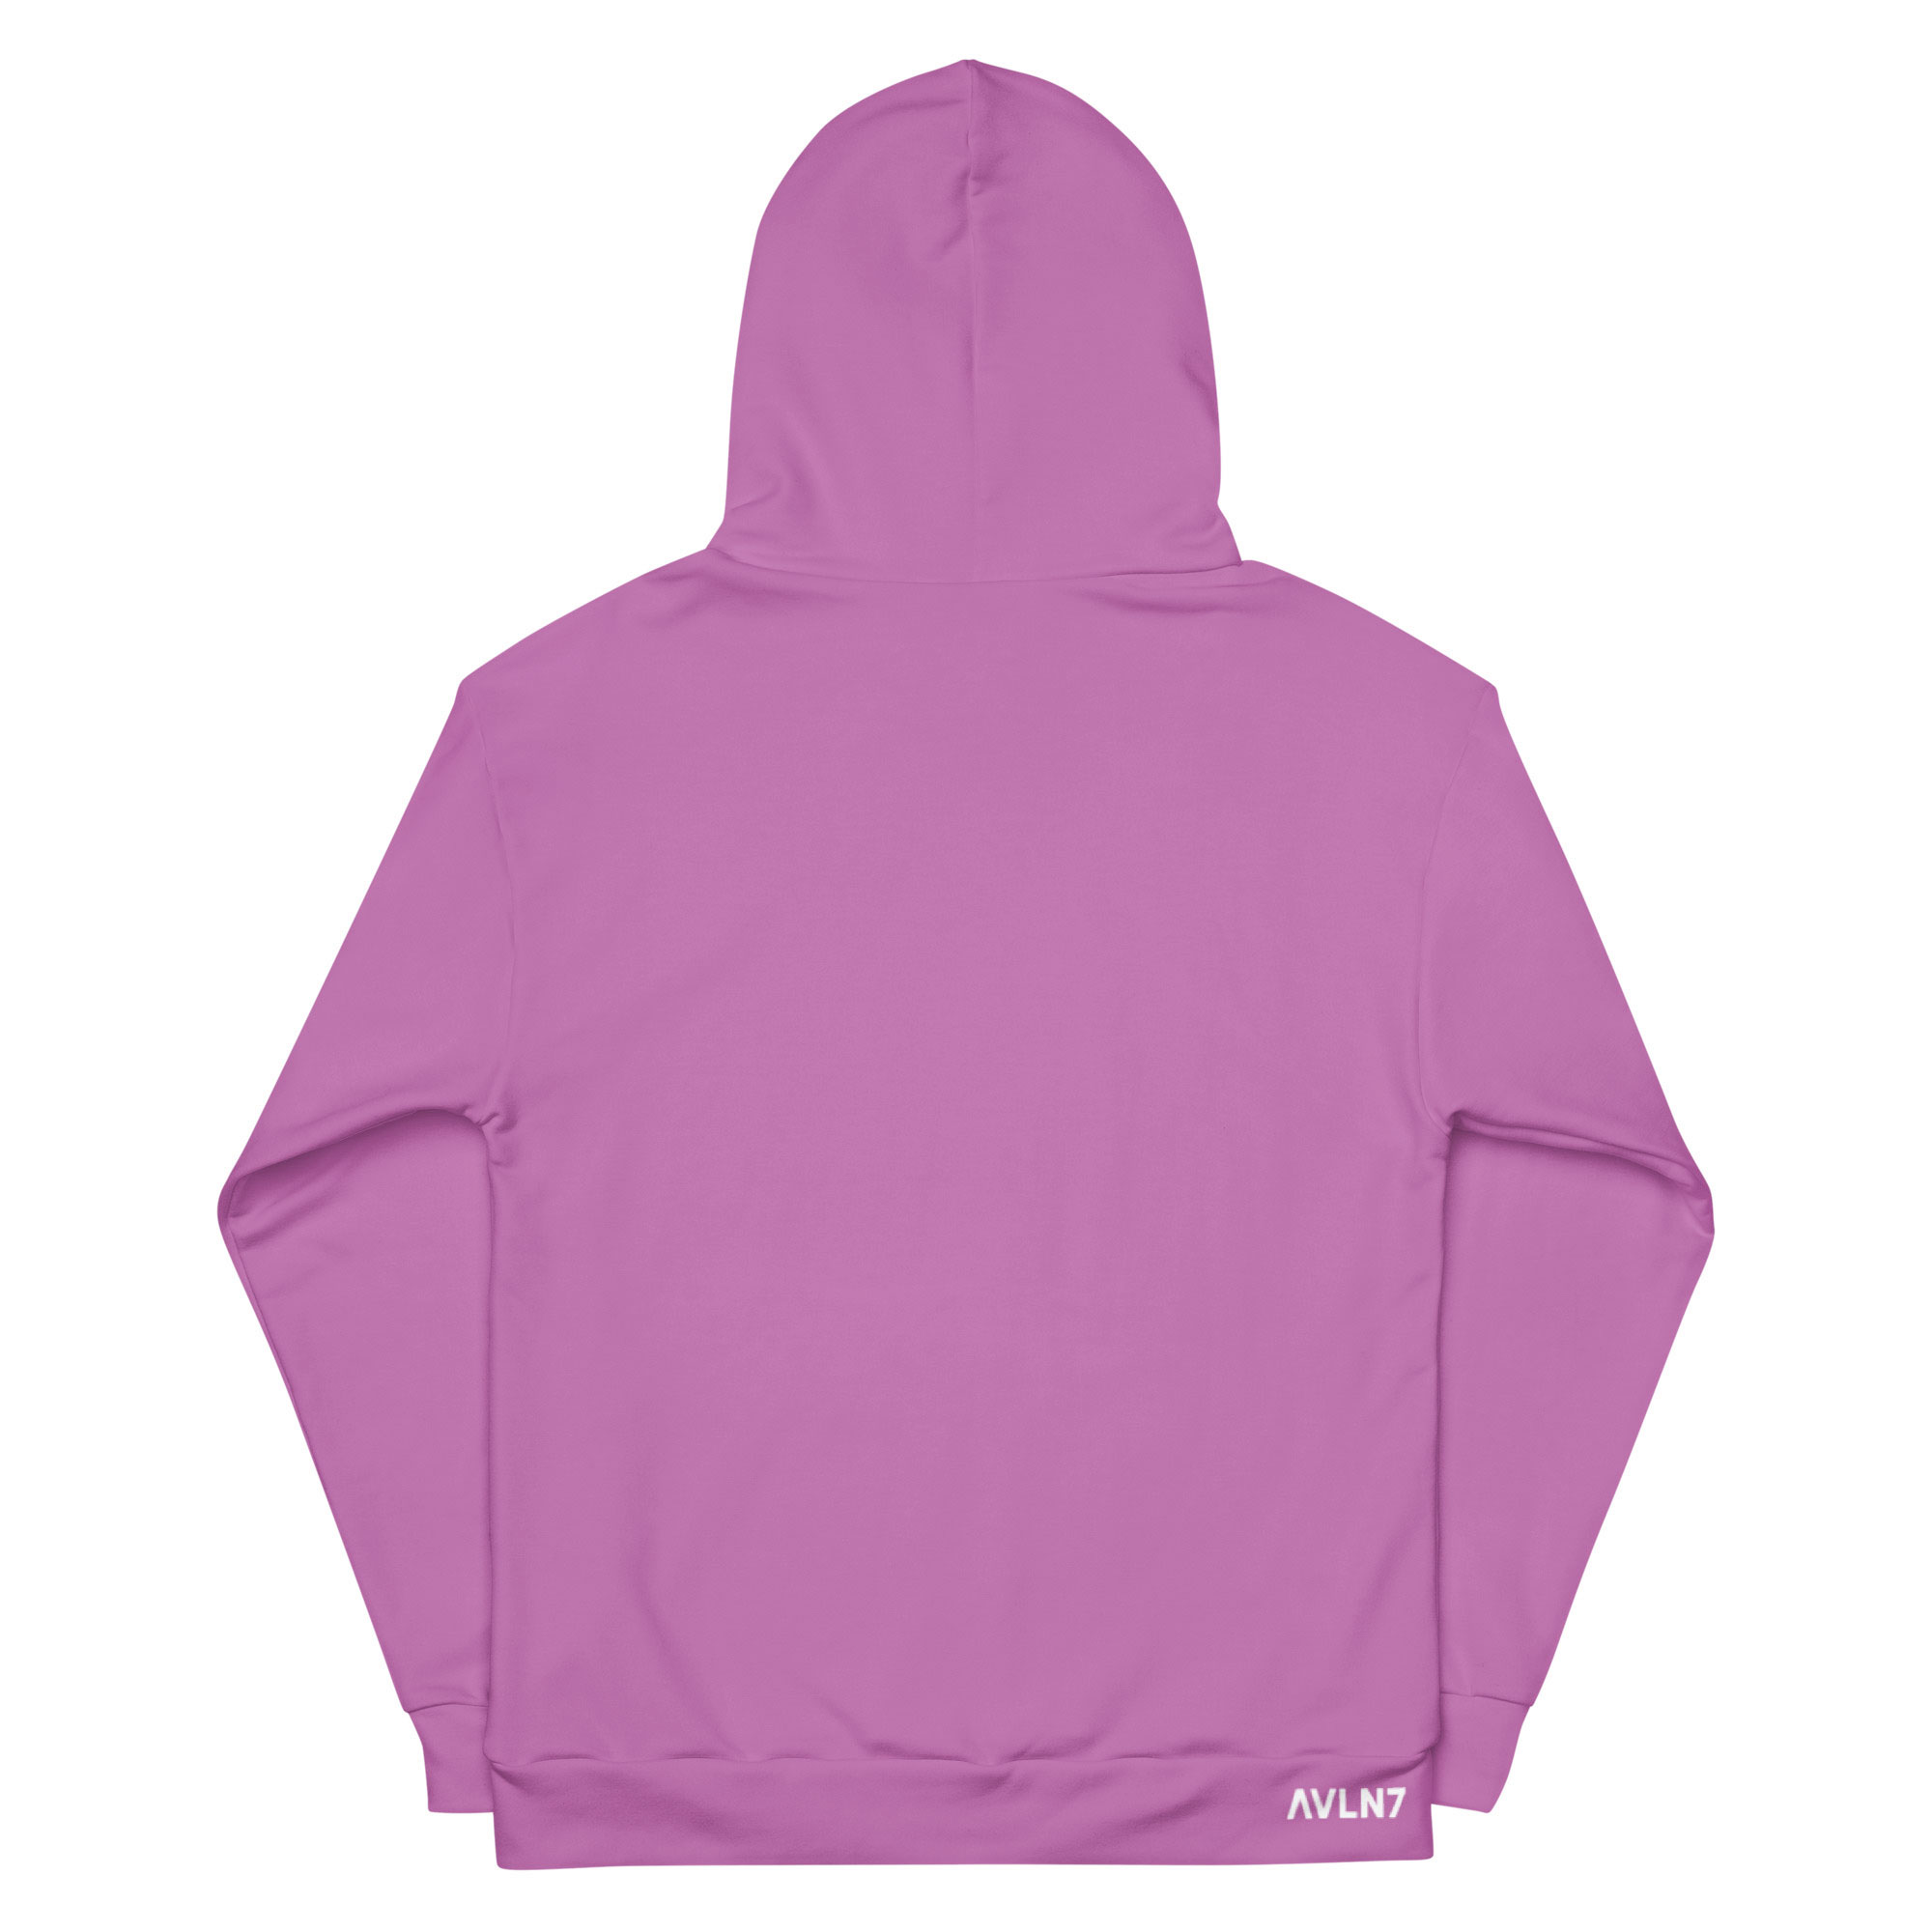 Lavender Color AVALON7 skiing and snowboarding hoodie